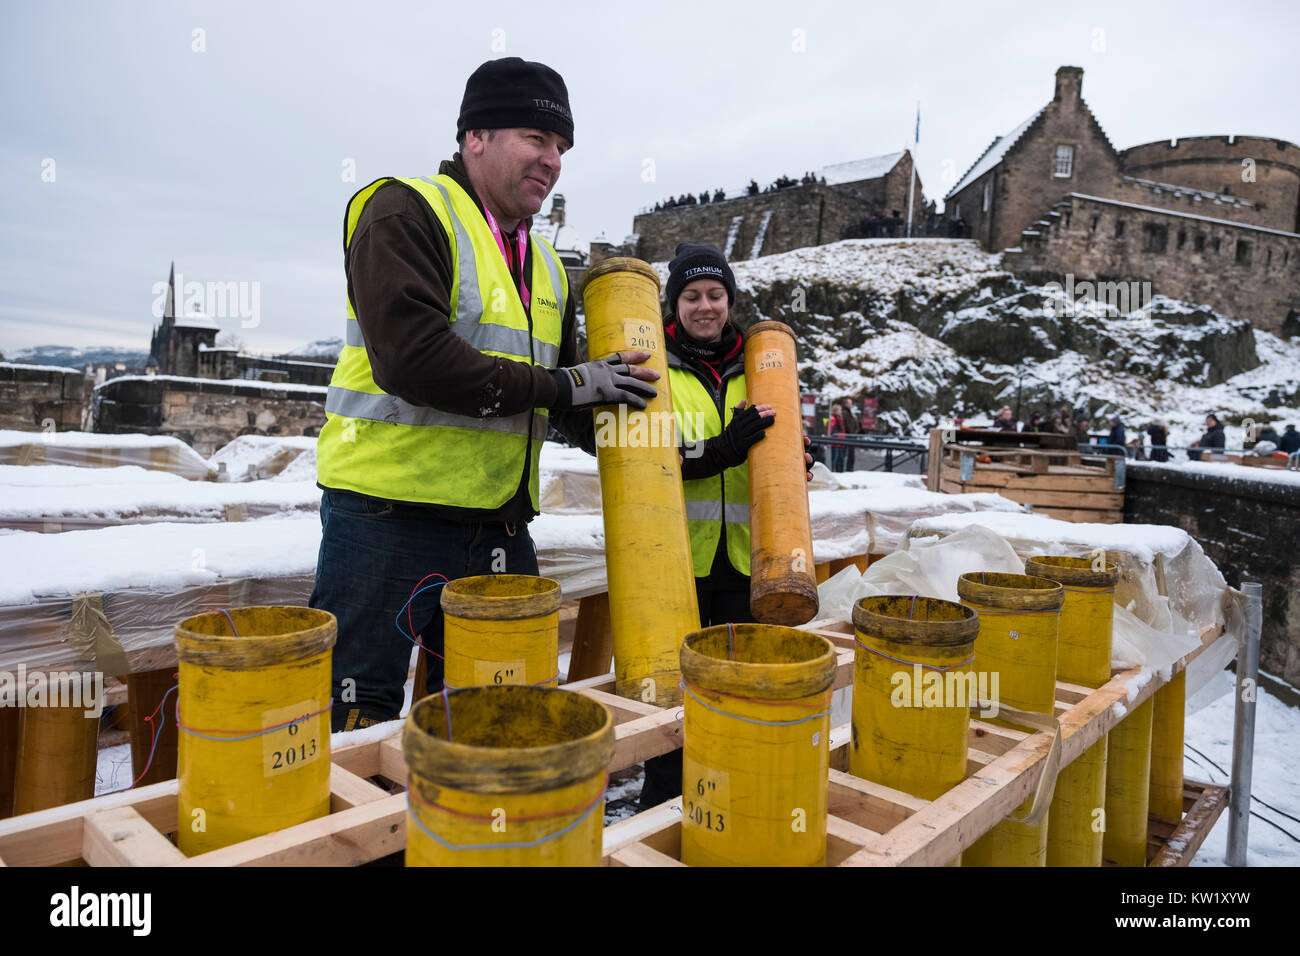 Edinburgh, Scotland, United Kingdom. 29th Dec, 2017. Pyrotechnicians from Titanium Fireworks demonstrate large fireworks and launching tubes at Edinburgh Castle ahead of the annual Hogmanay fireworks display on New Years Eve. Here 150mm launching tubes are handled by Lynn Wiseman and Shaun Gibson. These are the largest shells used in the display. Credit: Iain Masterton/Alamy Live News Stock Photo